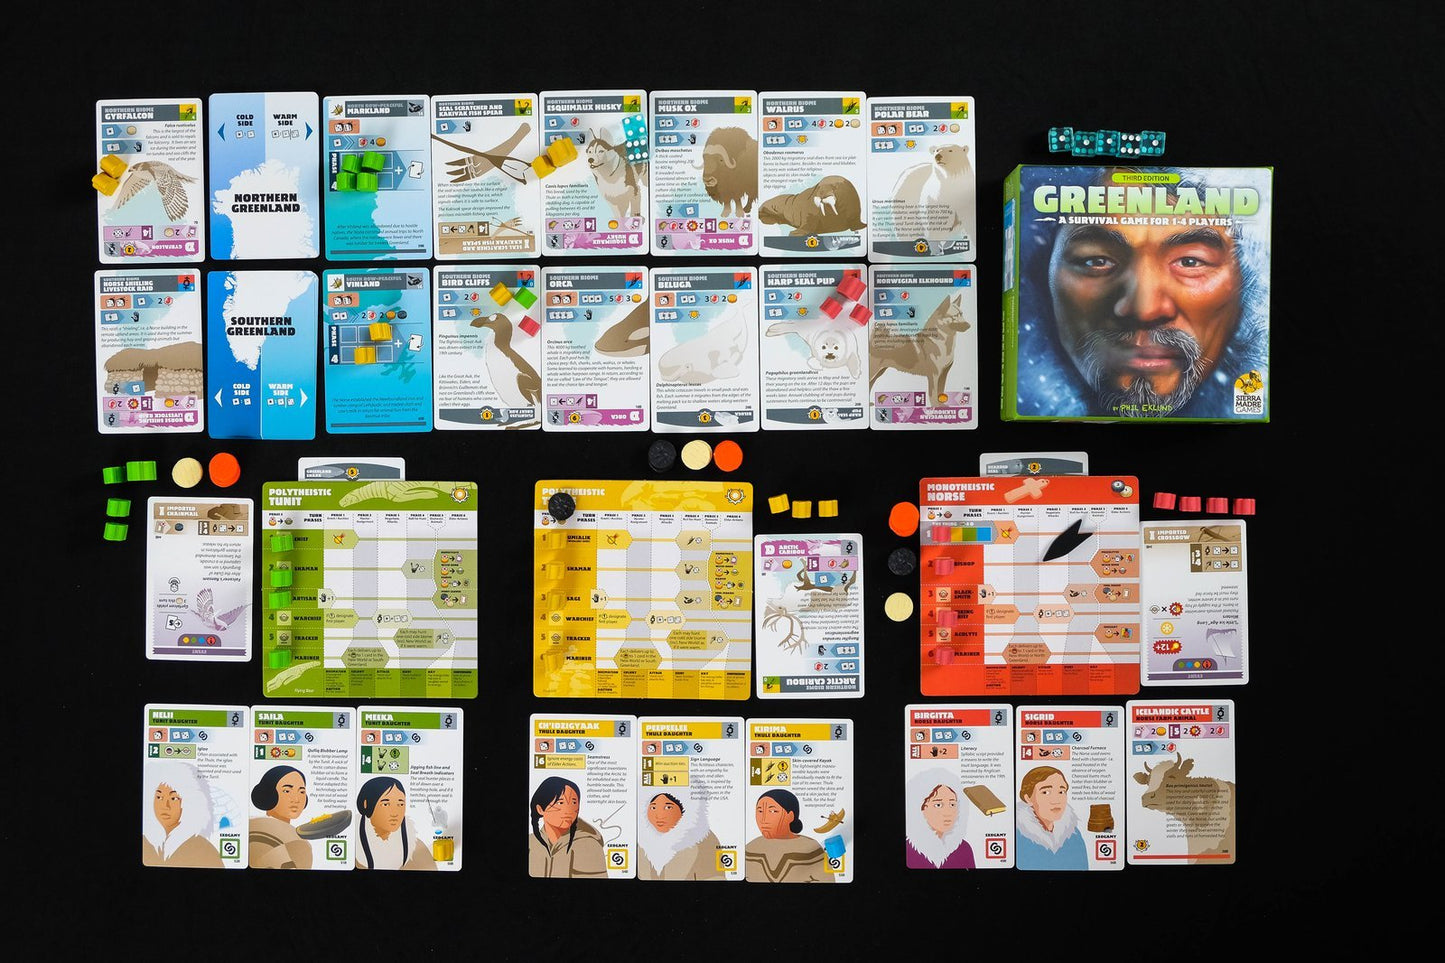 The board game's character, region, and player aid cards displayed next to the game box